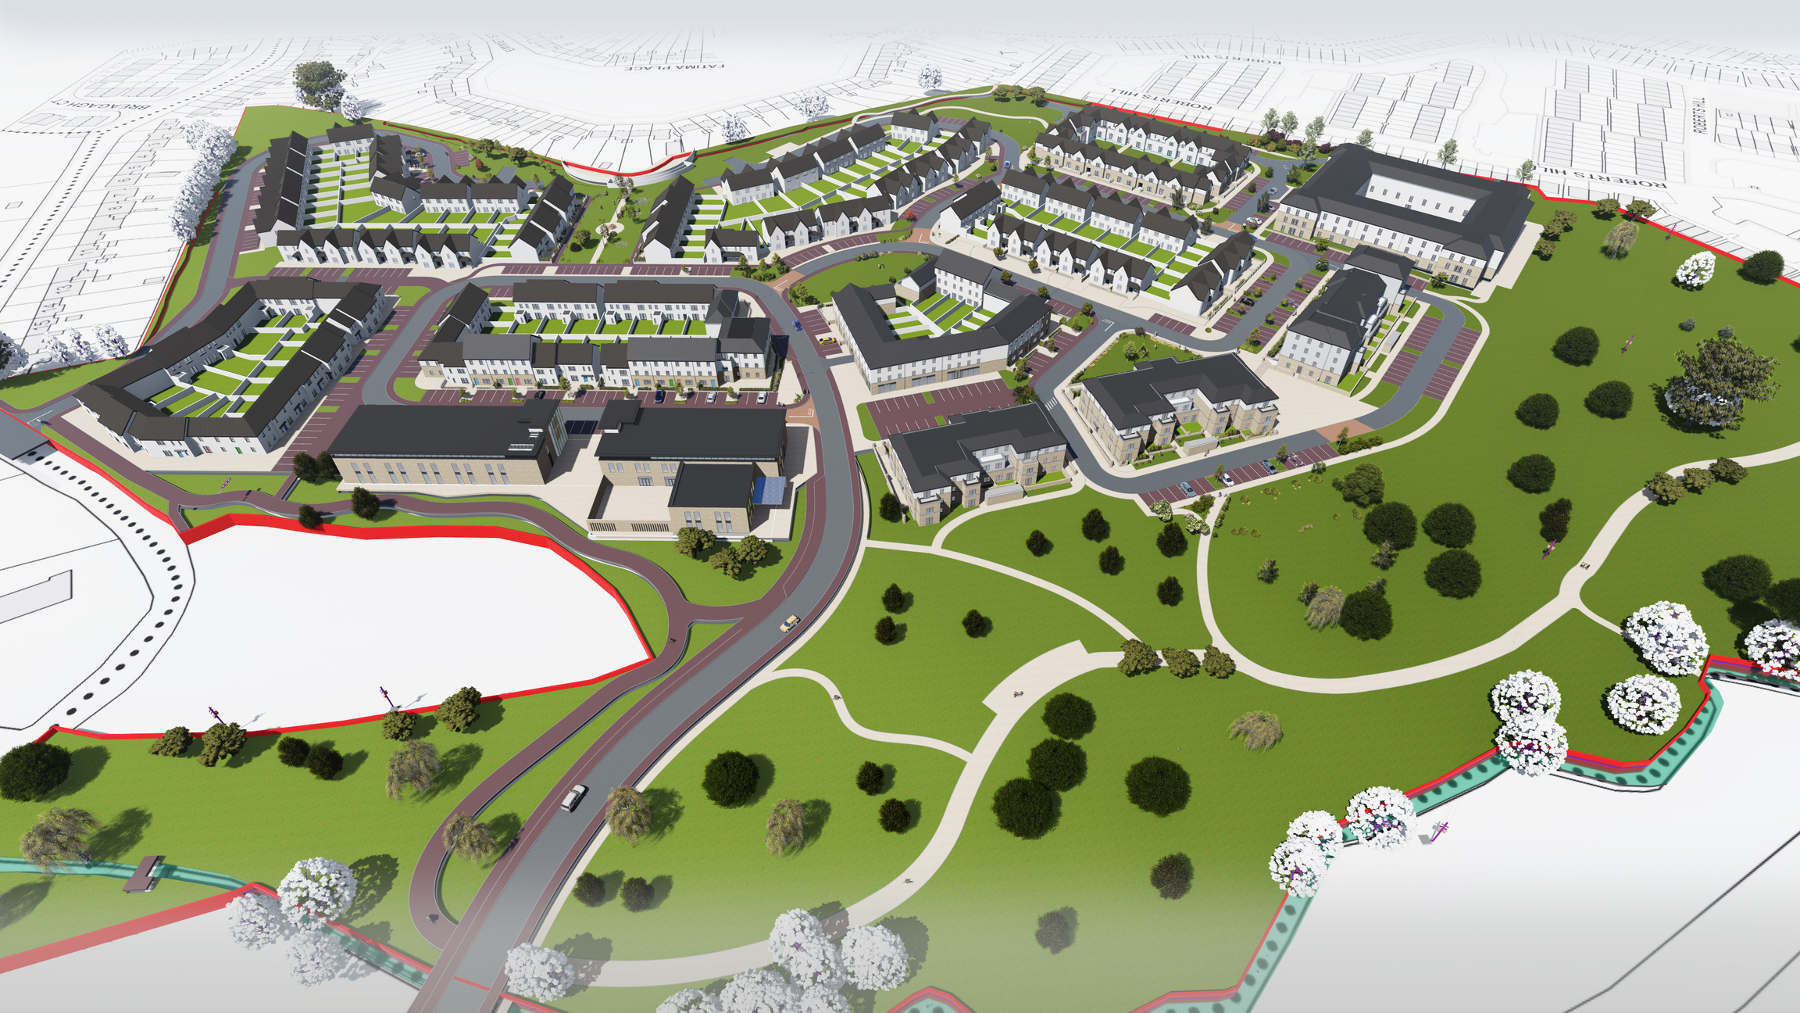 Planning success for a large mixed-use development at Daly’s Hill, Kilkenny. Architecture Ireland, Urban Design, Dublin/Cork/Kerry Architecture